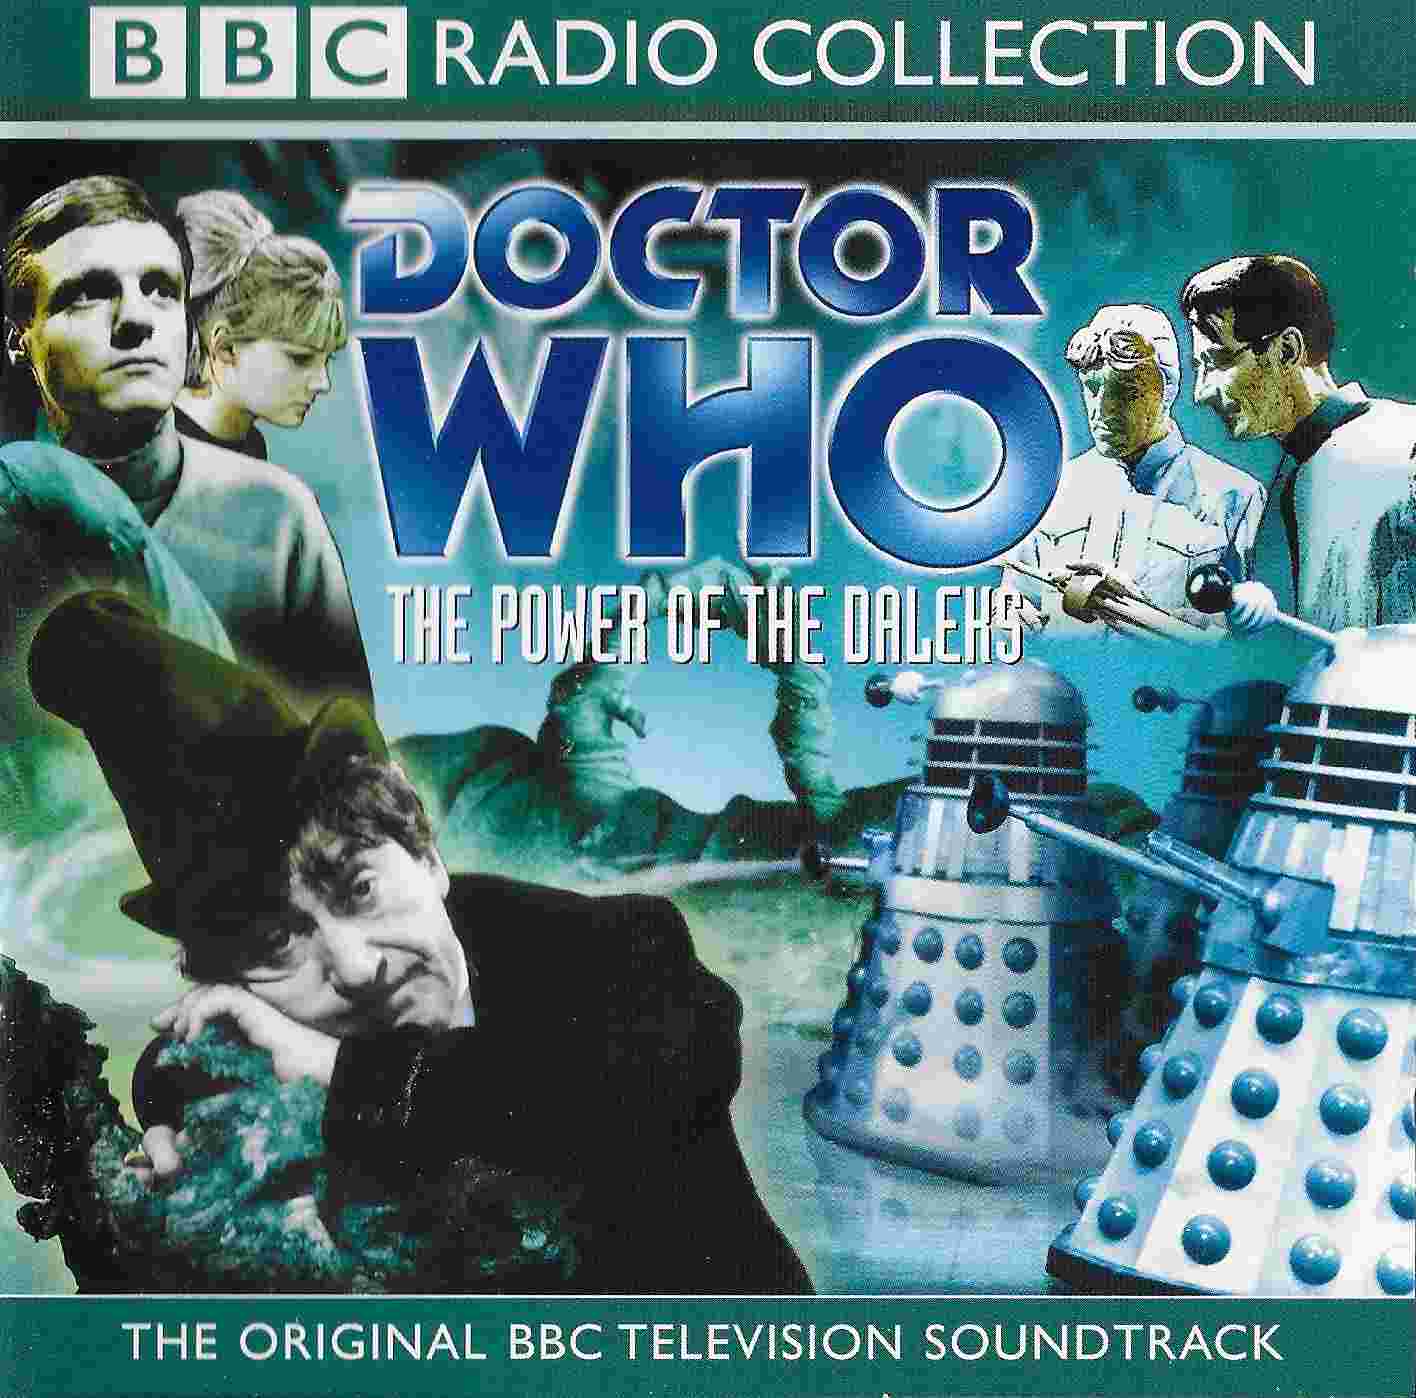 Picture of ISBN 0-563-49476-X1 Doctor Who - The power of the Daleks by artist David Whitaker from the BBC records and Tapes library